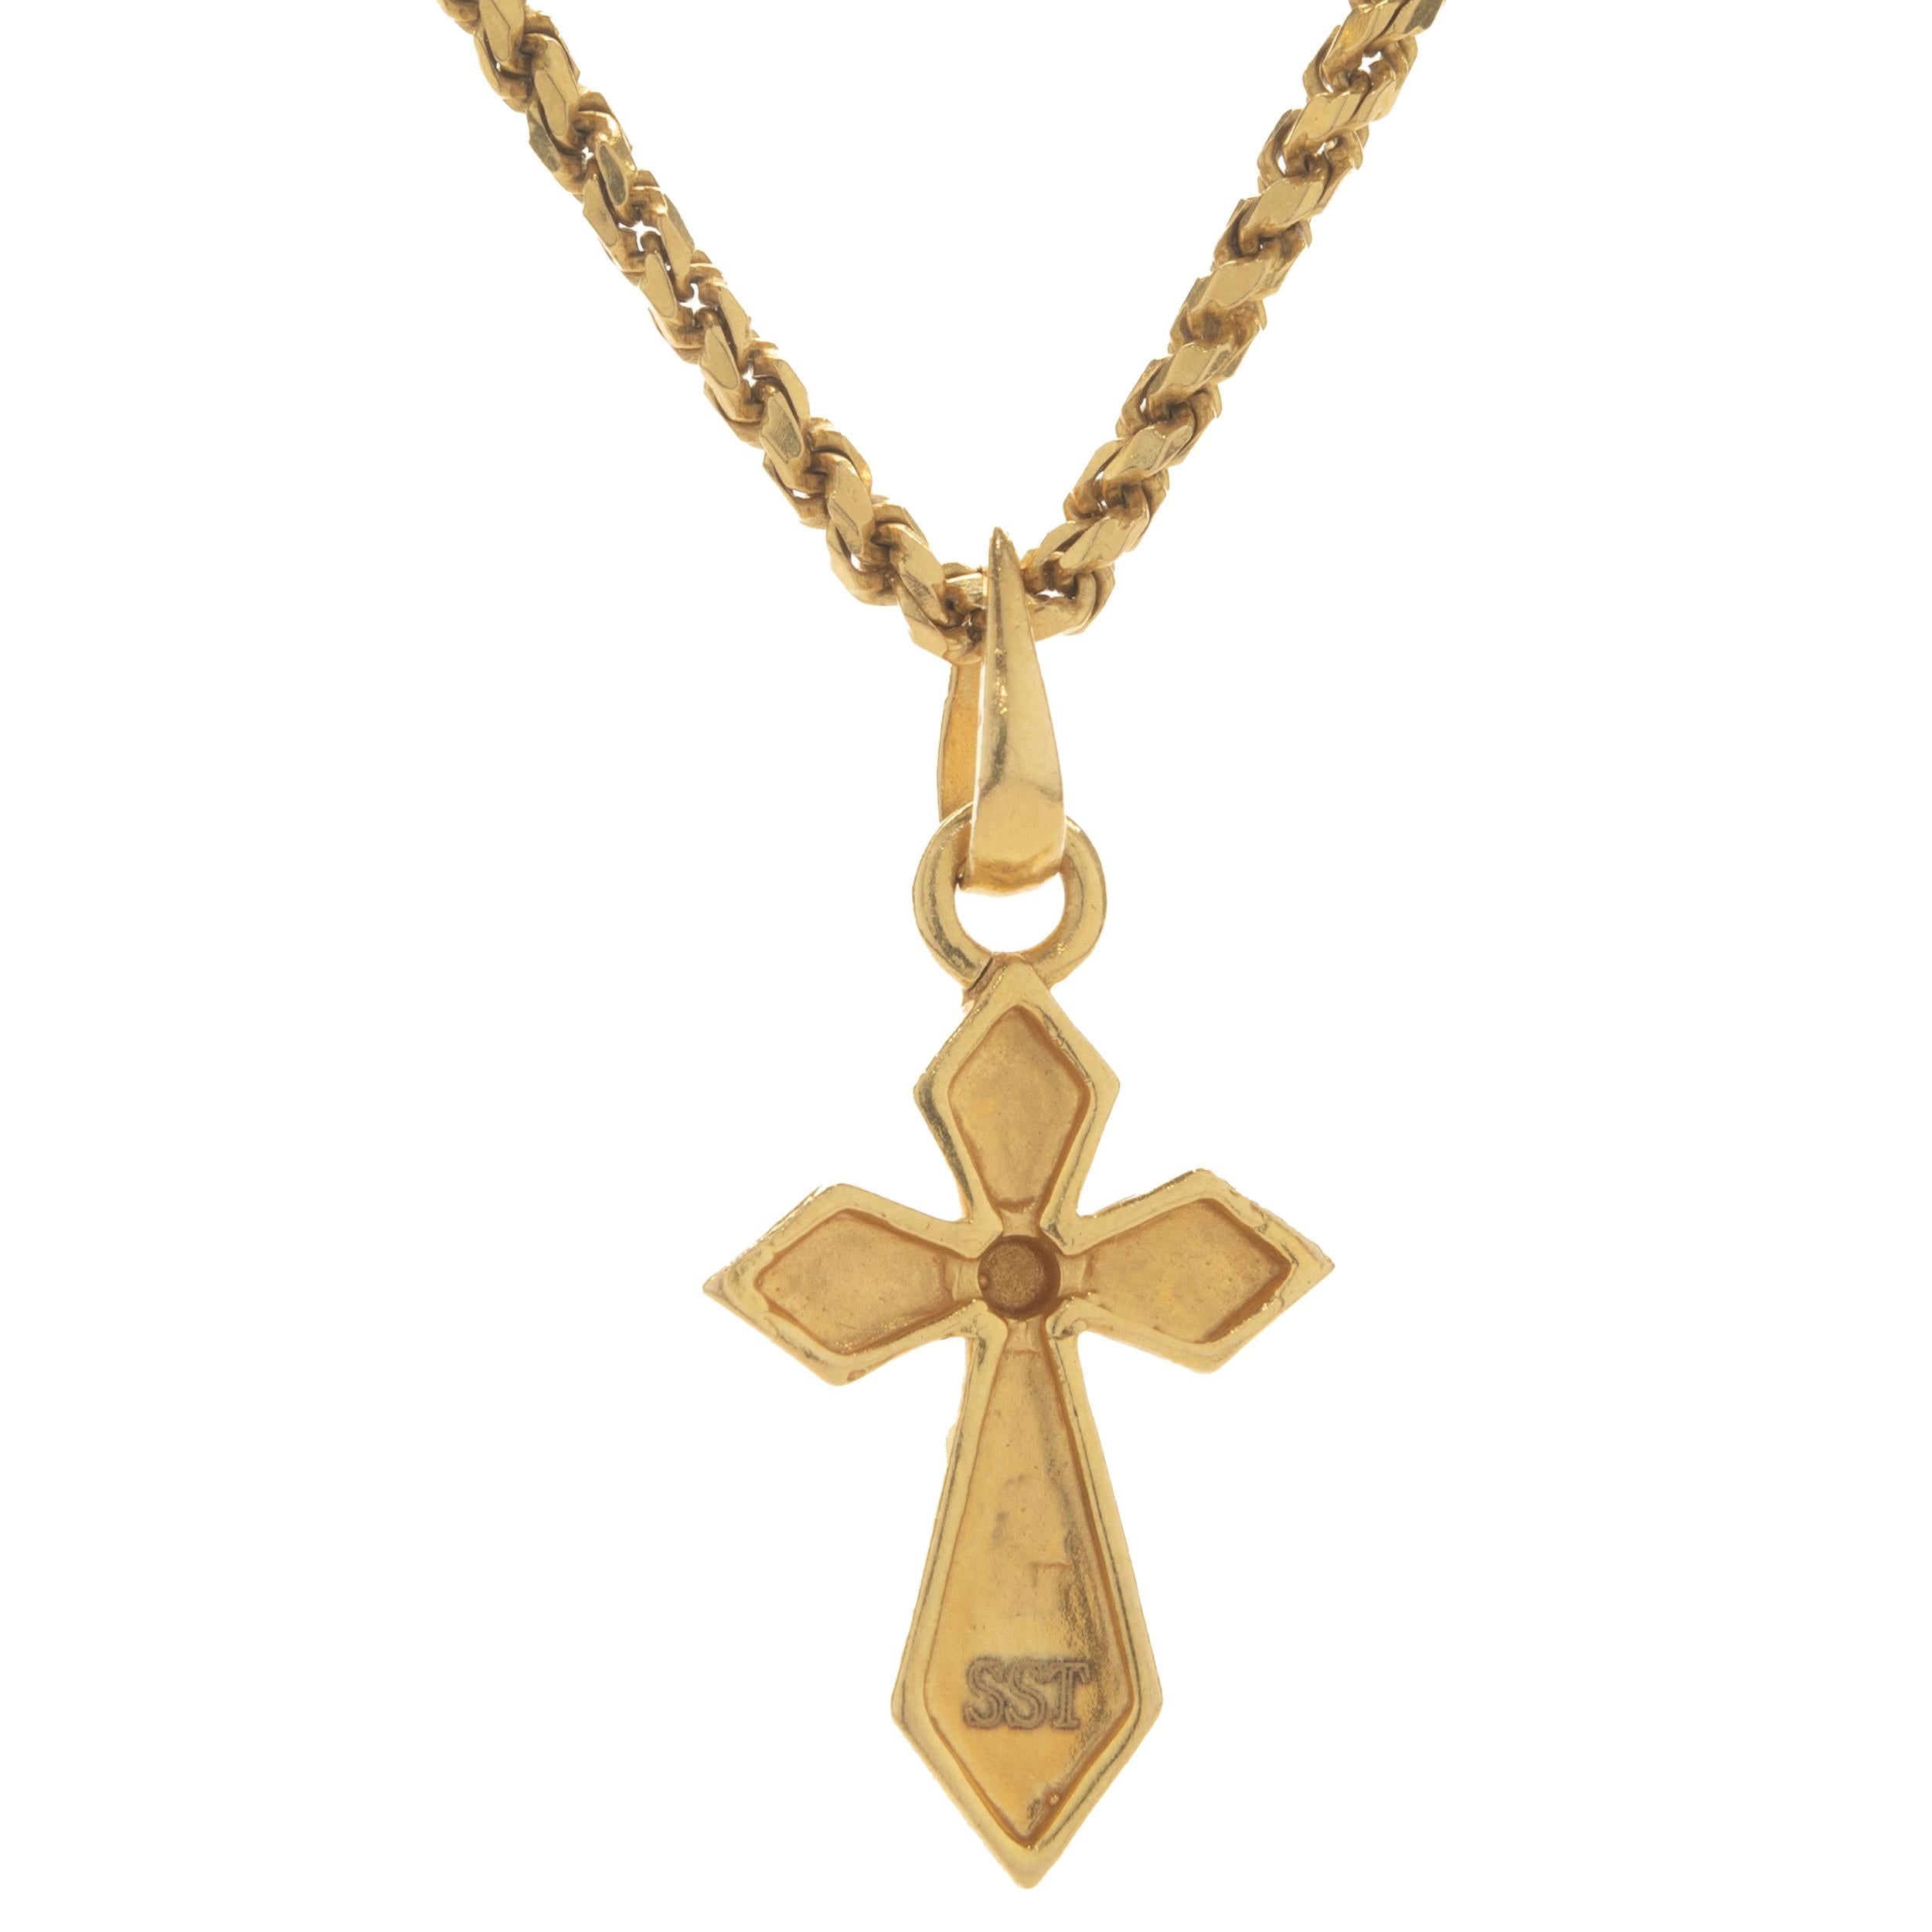 Designer: custom
Material: 22K yellow gold
Dimensions: necklace measures 18-inches in length
Weight: 13.90 grams